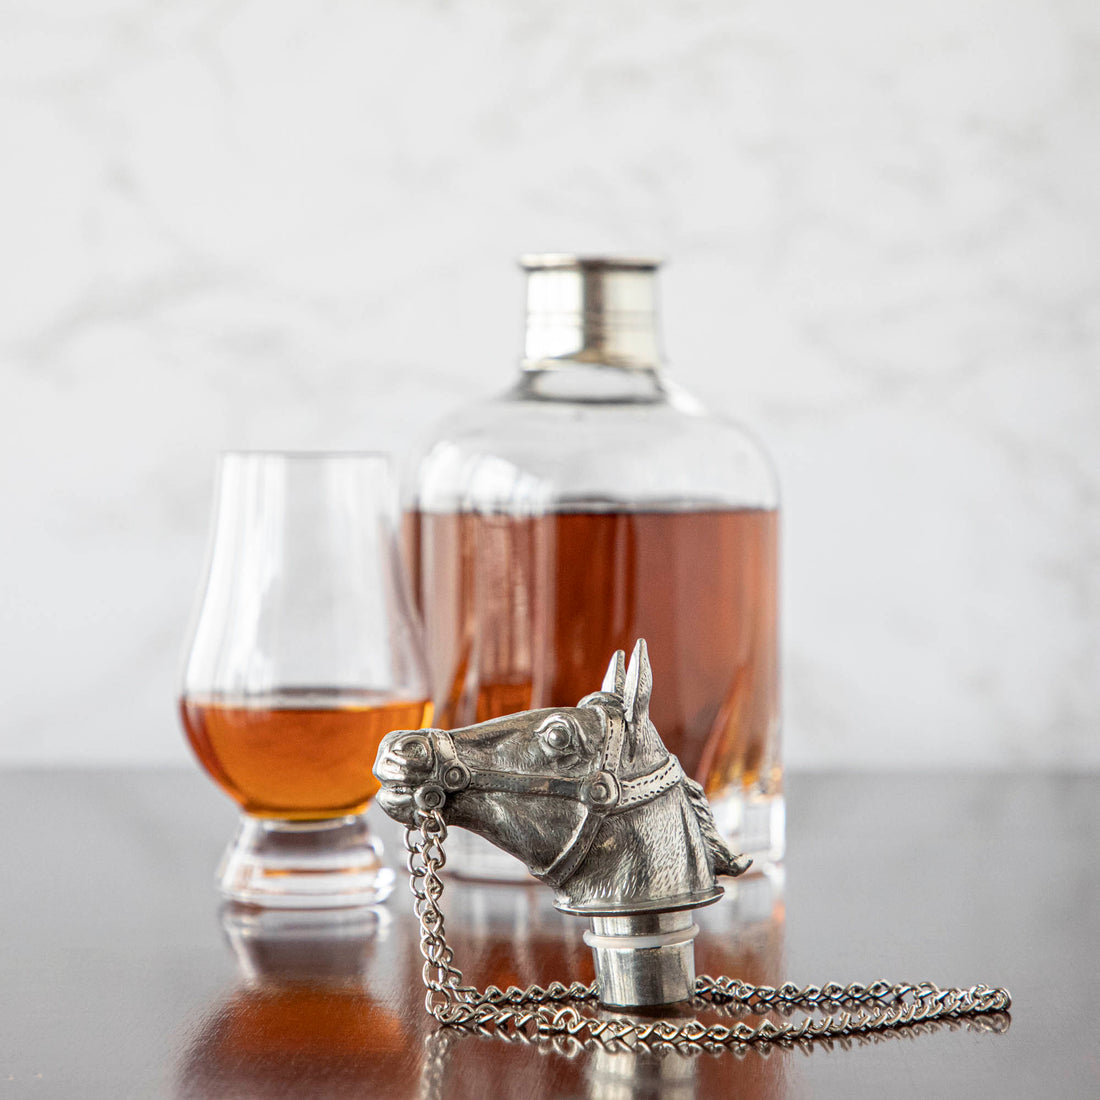 An ornamental crystal Menagerie whisky/spirit decanter, glass, and a Menagerie horse-head stopper on a wooden surface with a marble backdrop.